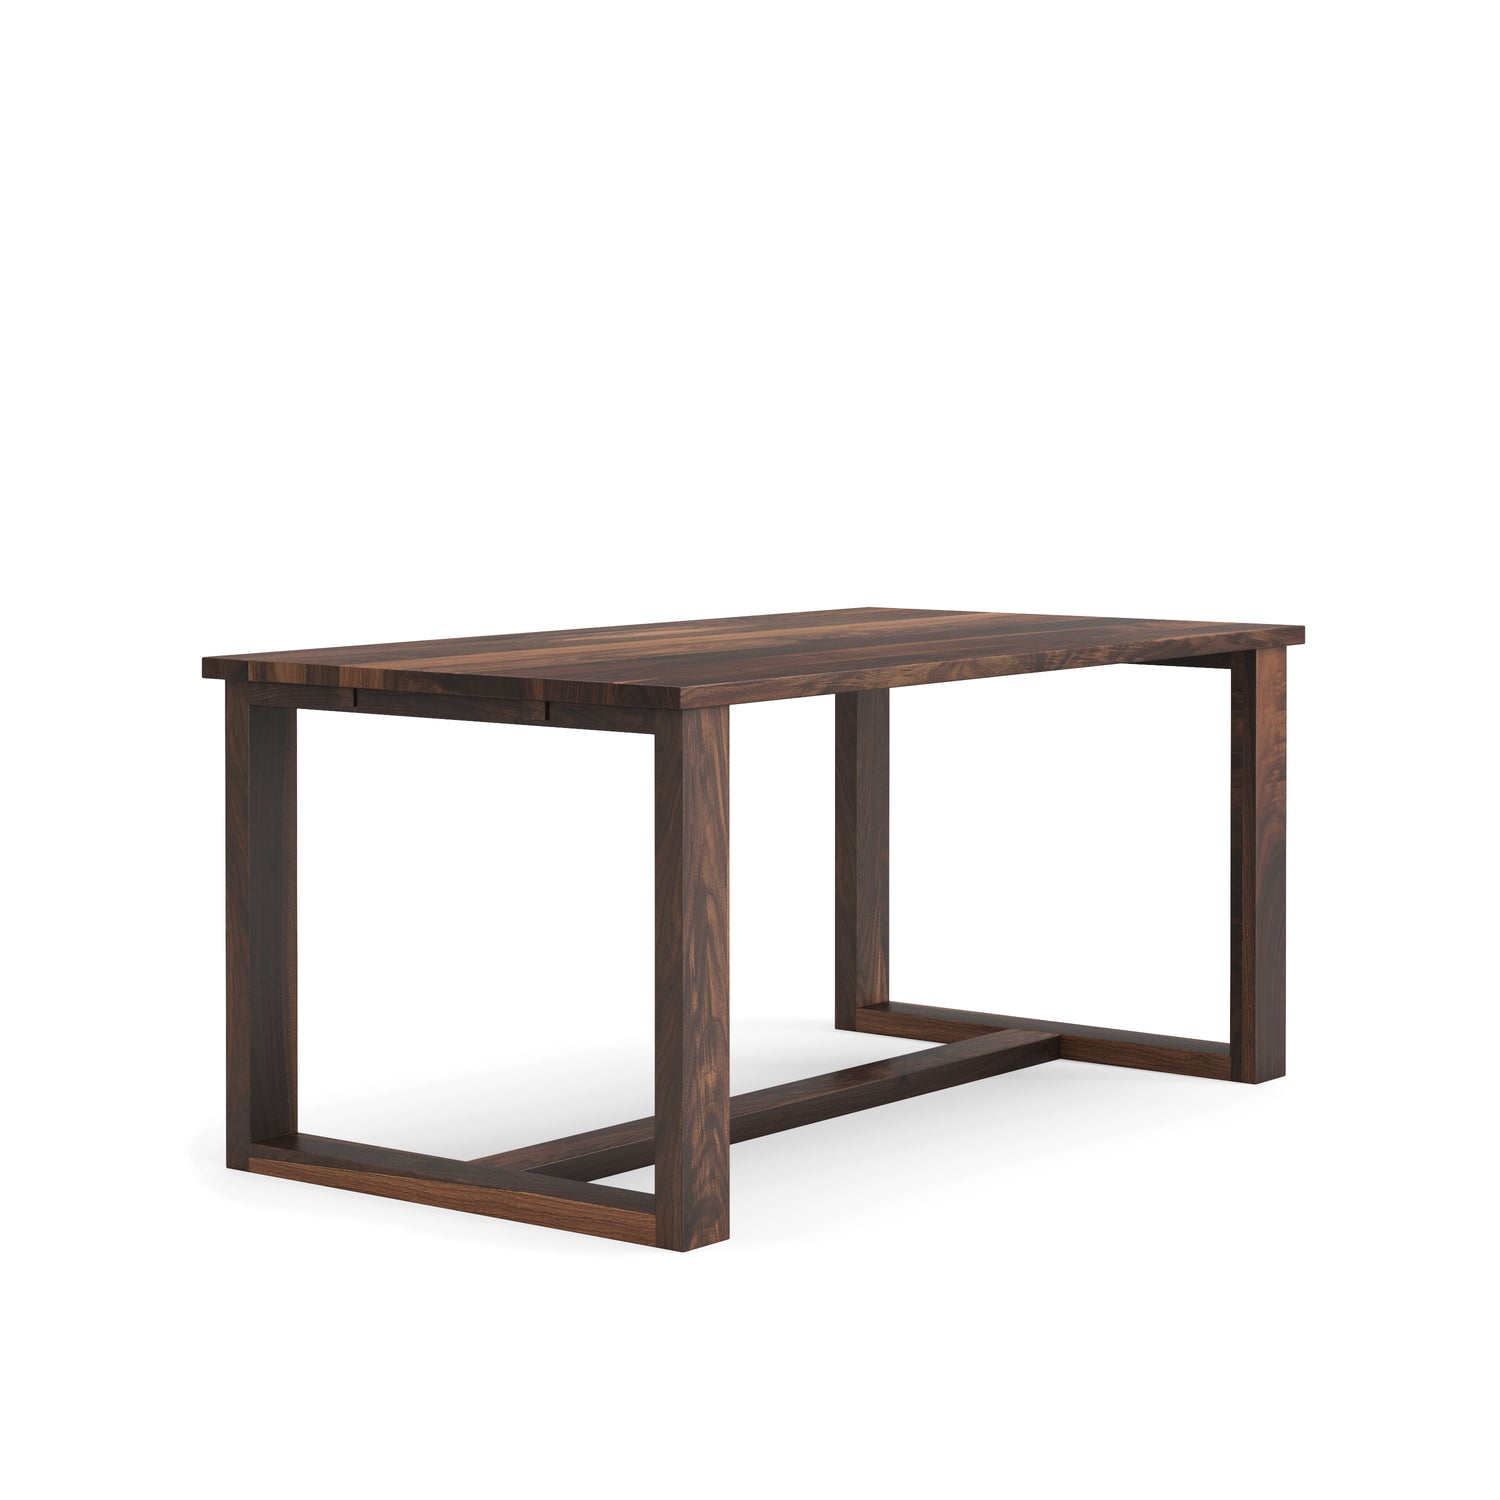 Arwin solid wood dinning table